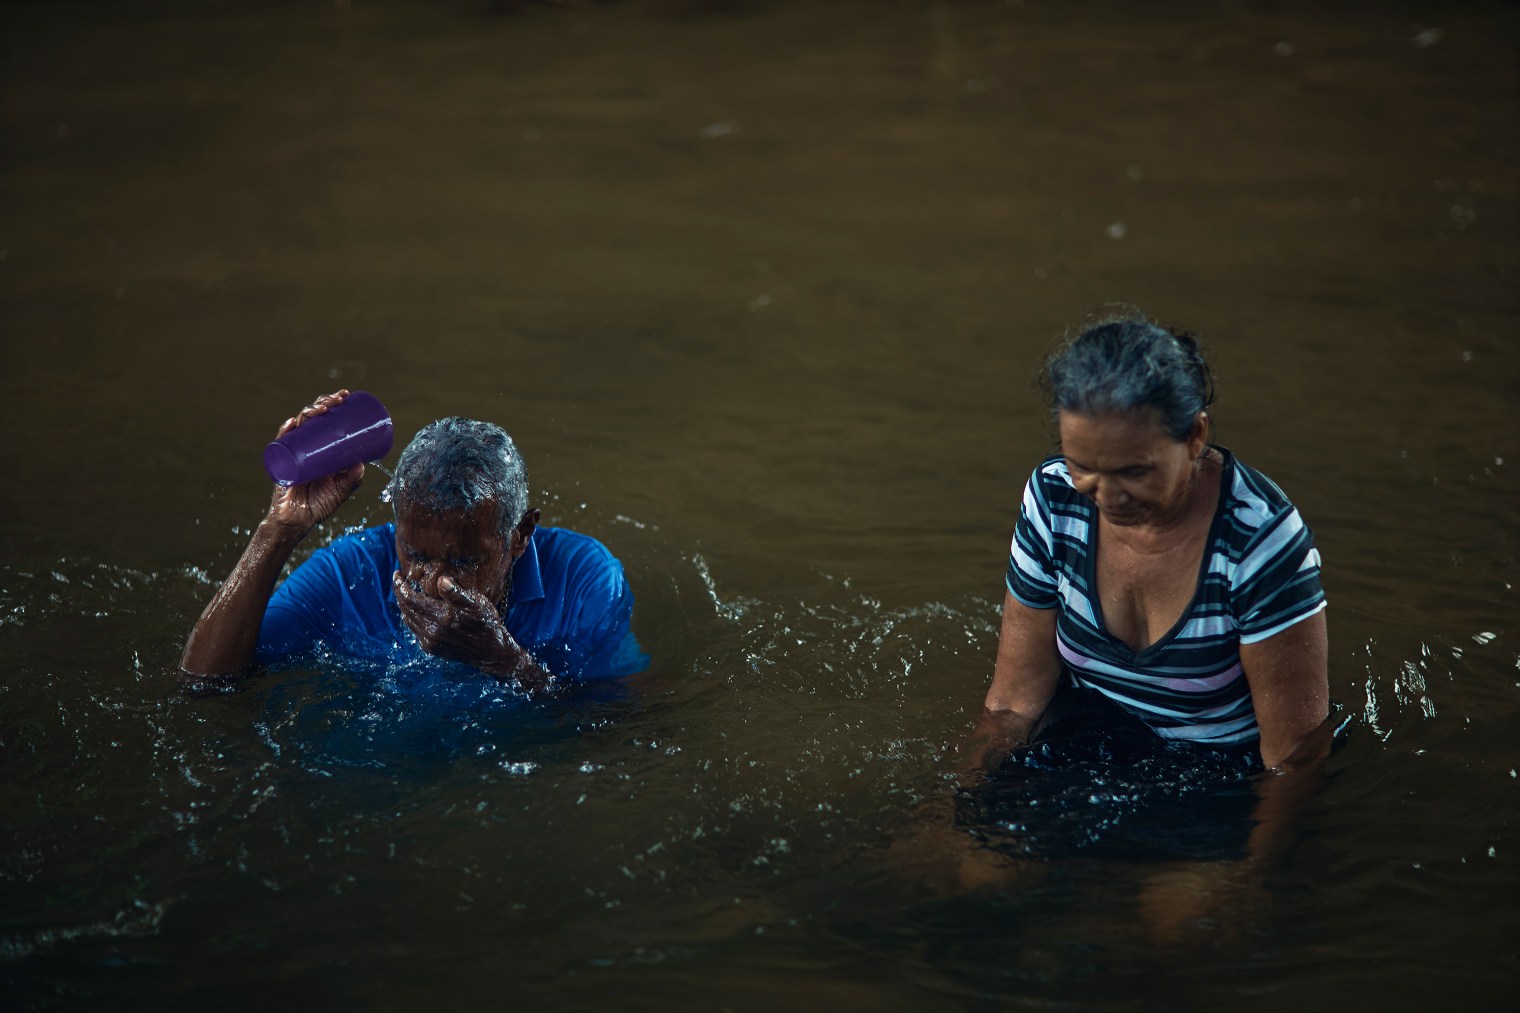 Luis Pinto, 73, and his neighbor Rosa Fernandez, 62, bathe in the river in Juncos, Puerto Rico, on Sept. 29, 2017.